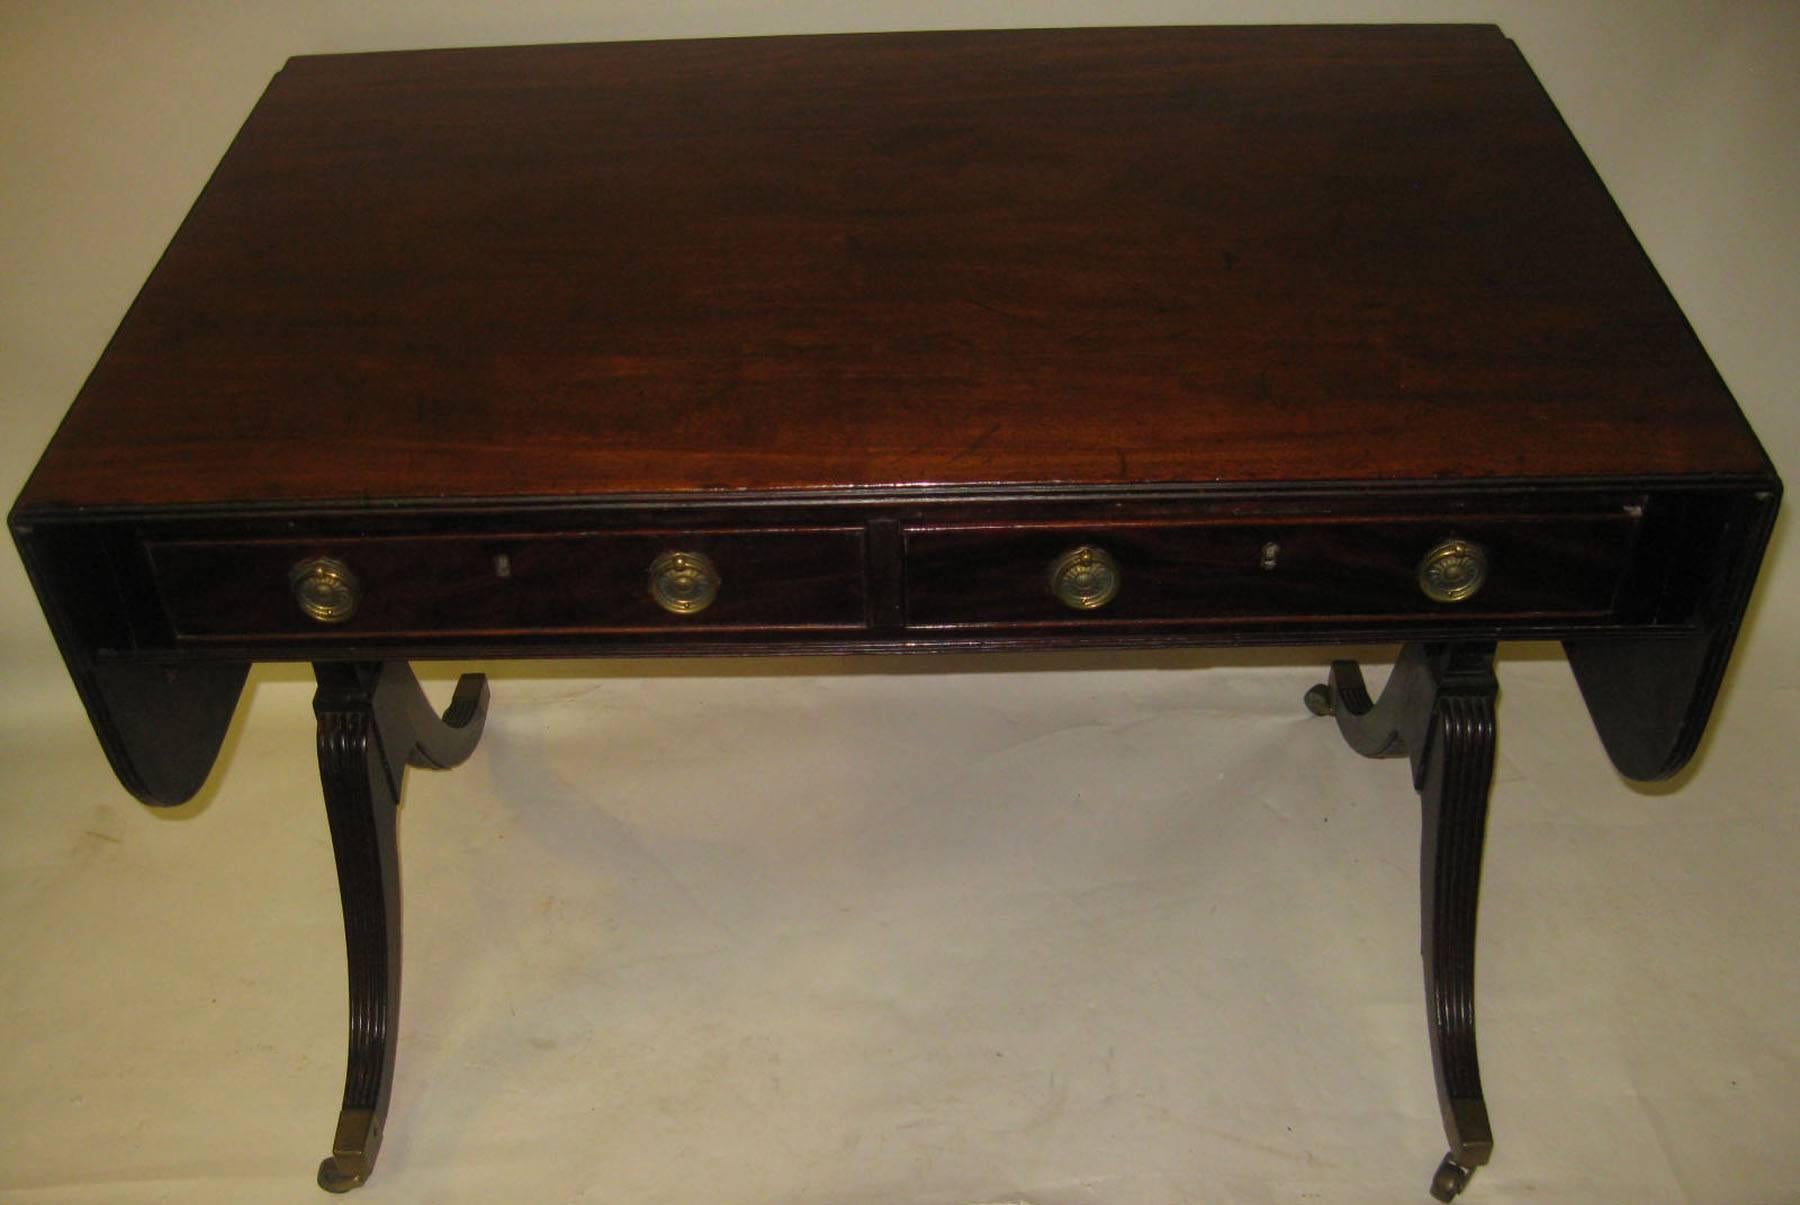 Handsome mahogany drop leaf sofa table with original finish and brass caps and casters. Two deep drawers with two false drawers in back. Reeded swept legs.
Measures: 60 inches wide when fully open. See other measurements below.